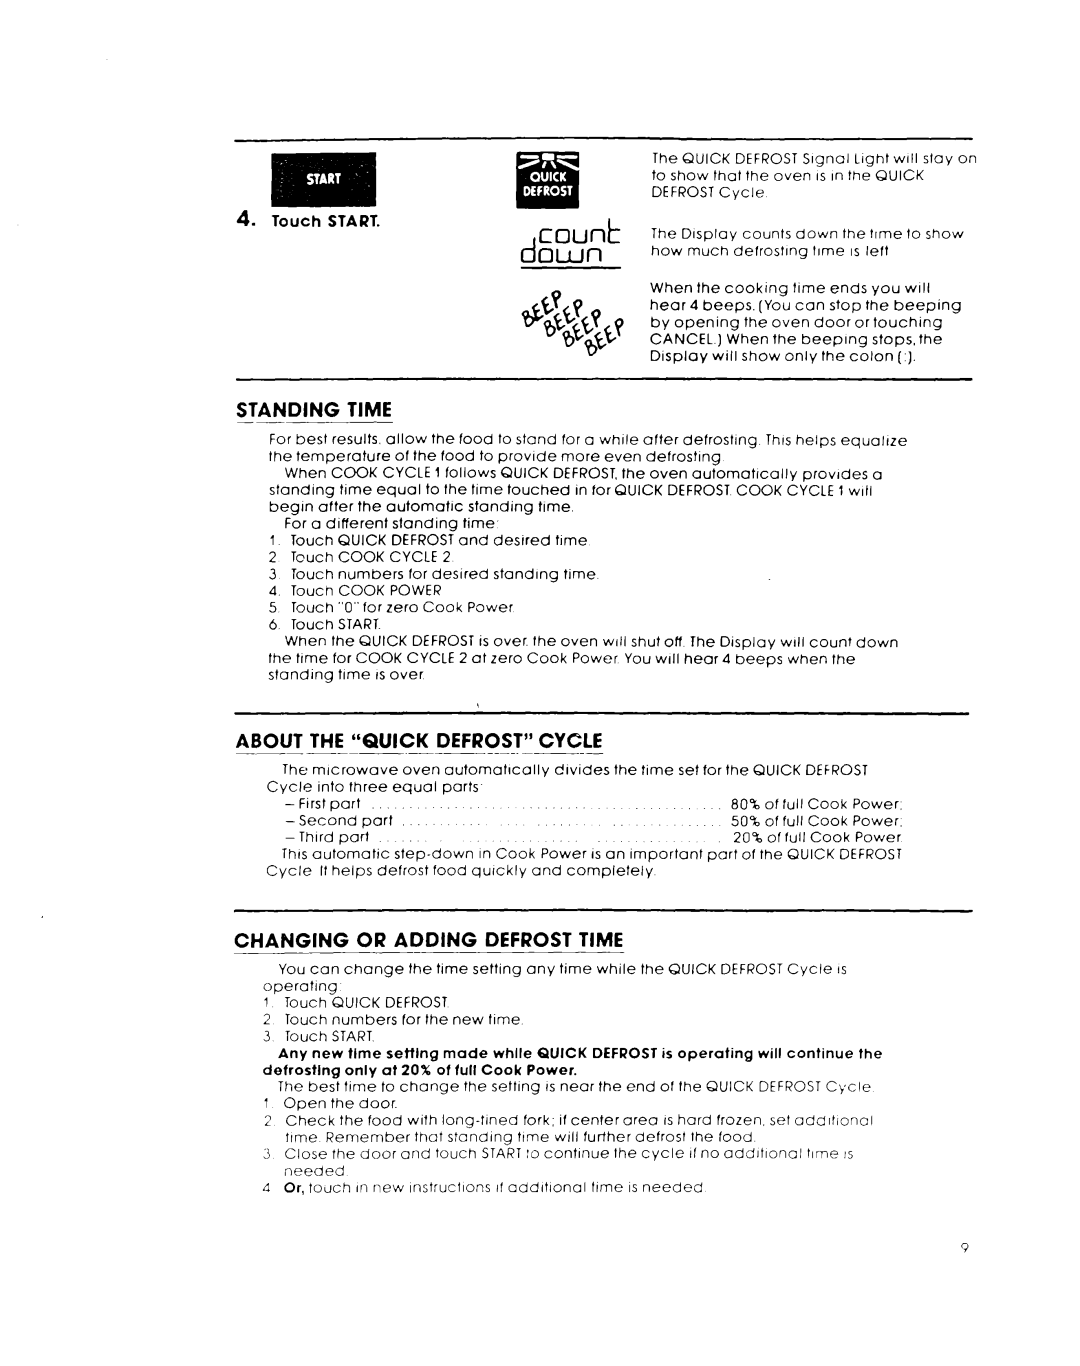 Whirlpool MW8650XL warranty count, d own, Or Adding, About The “Quick Defrost” Cycle, Defrost Time, Standing, Changing 